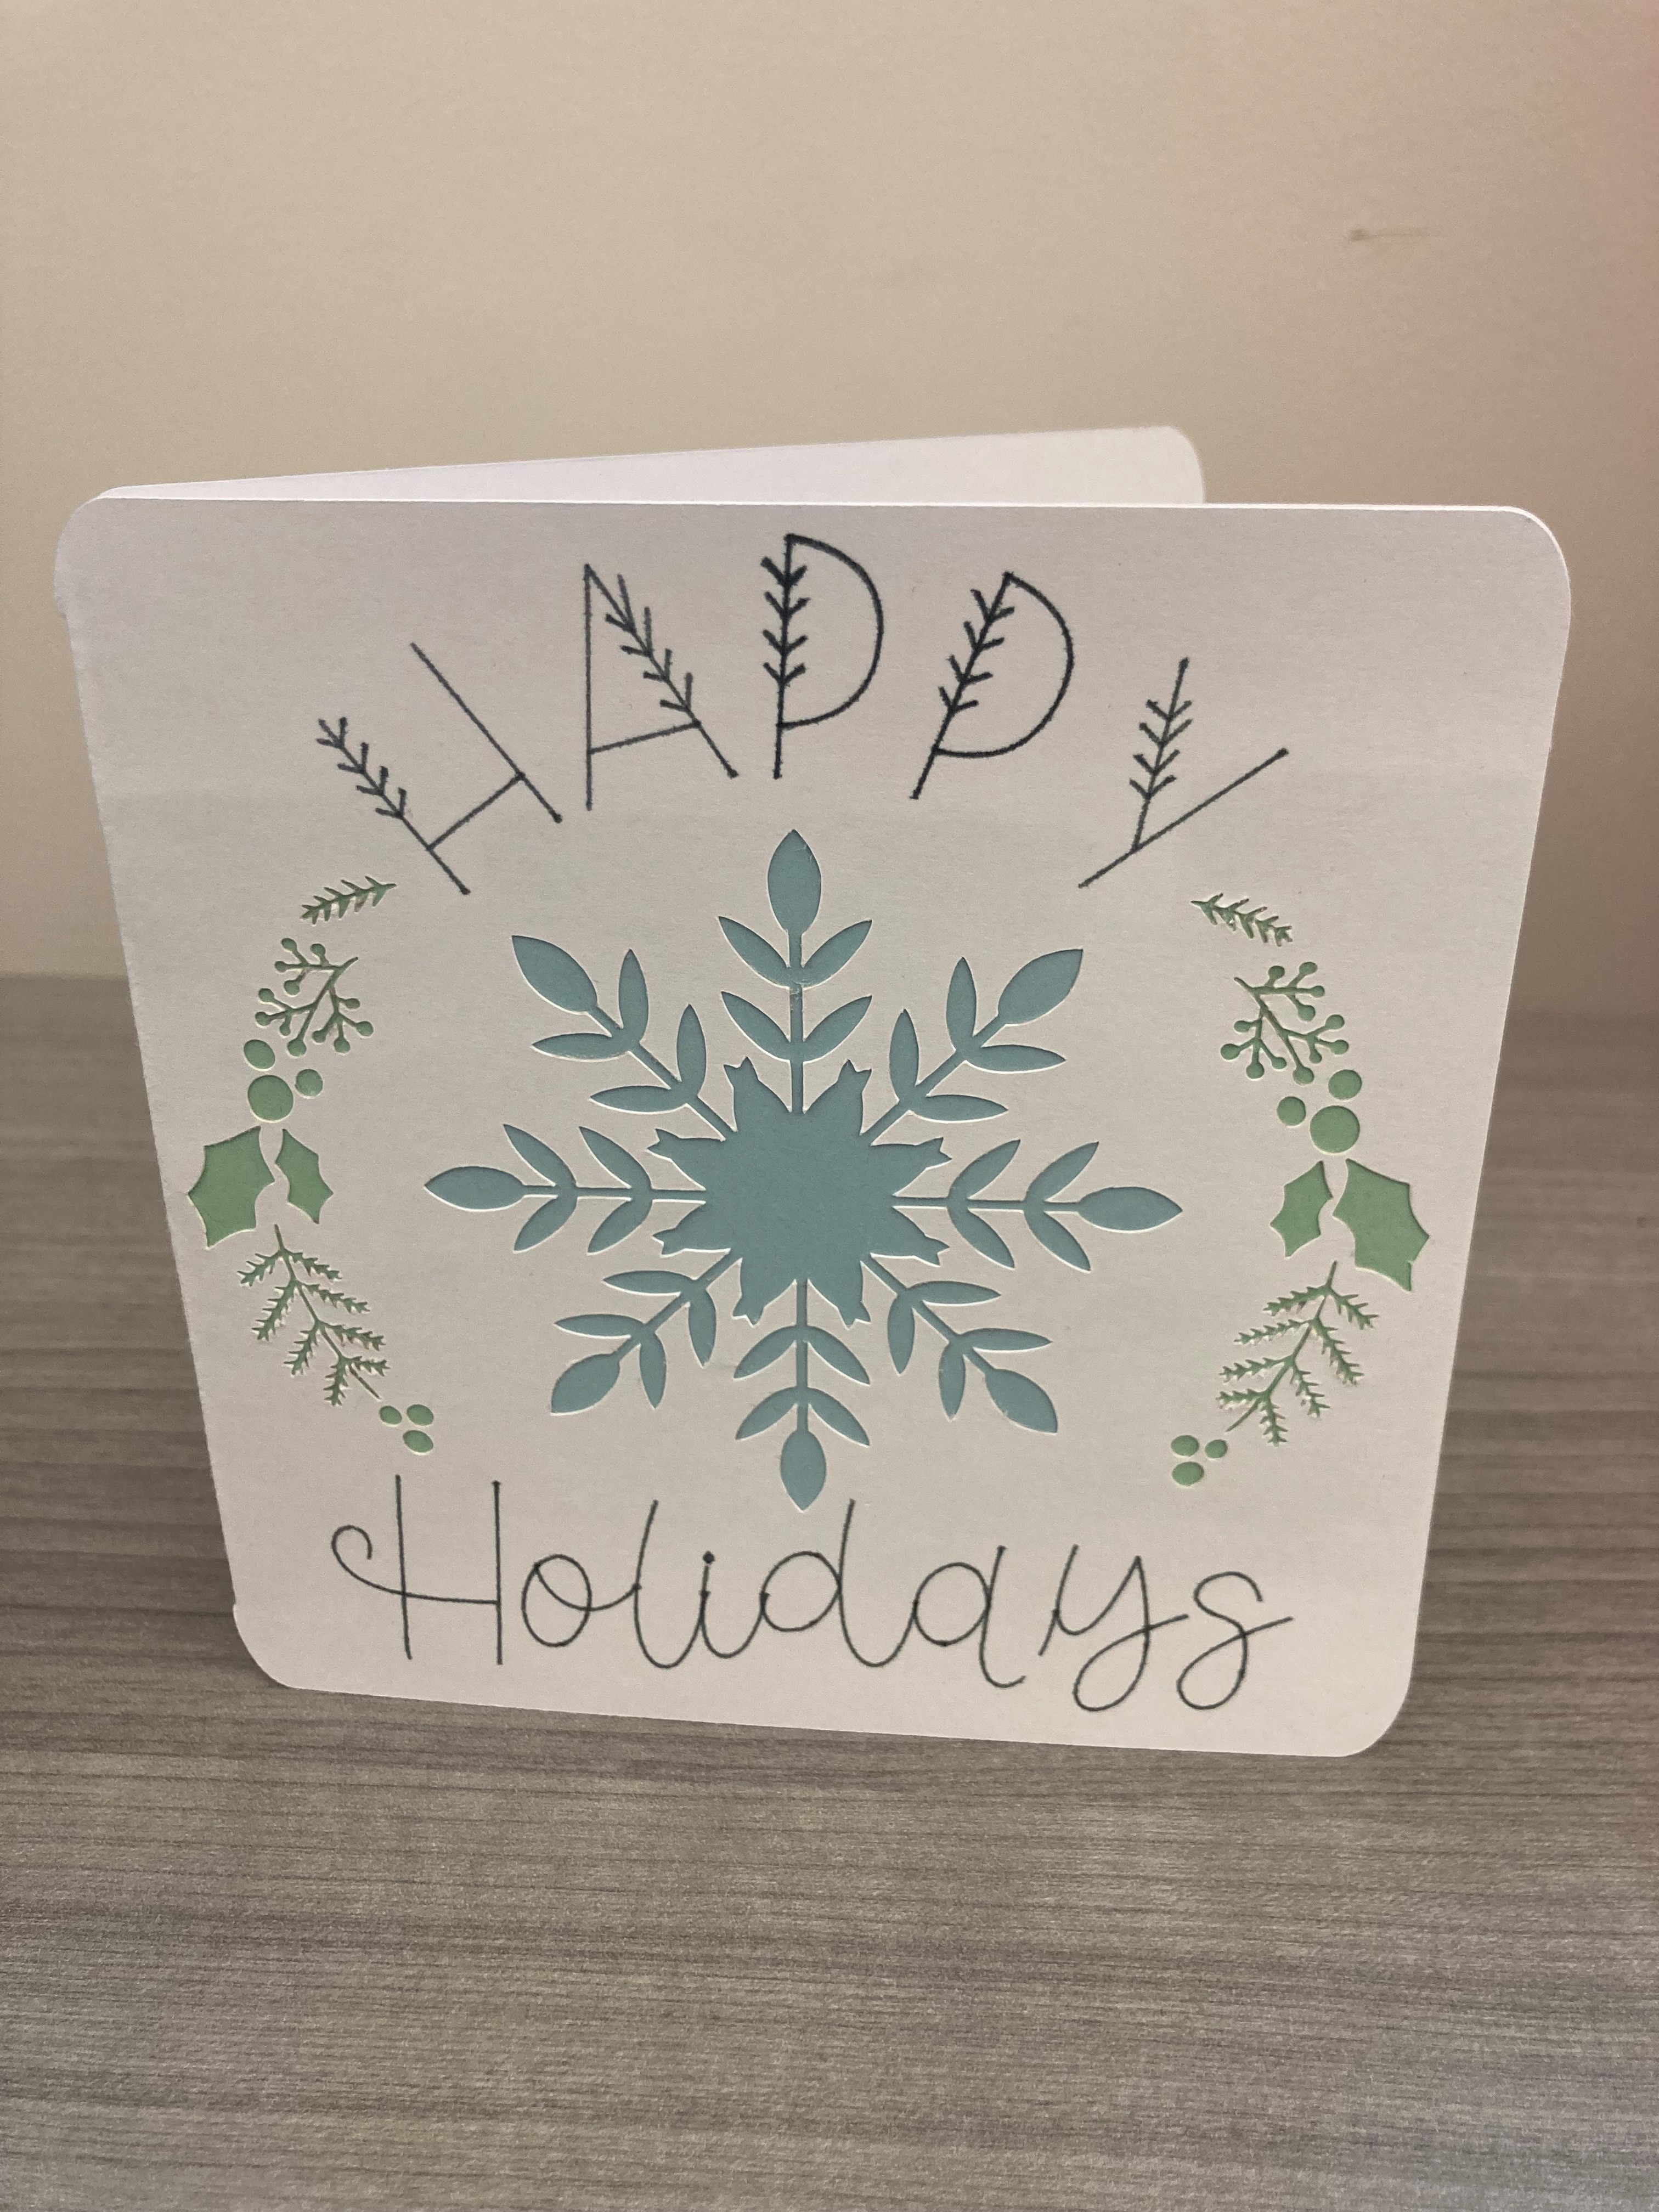 paper card; text "Happy Holidays"; snowflake